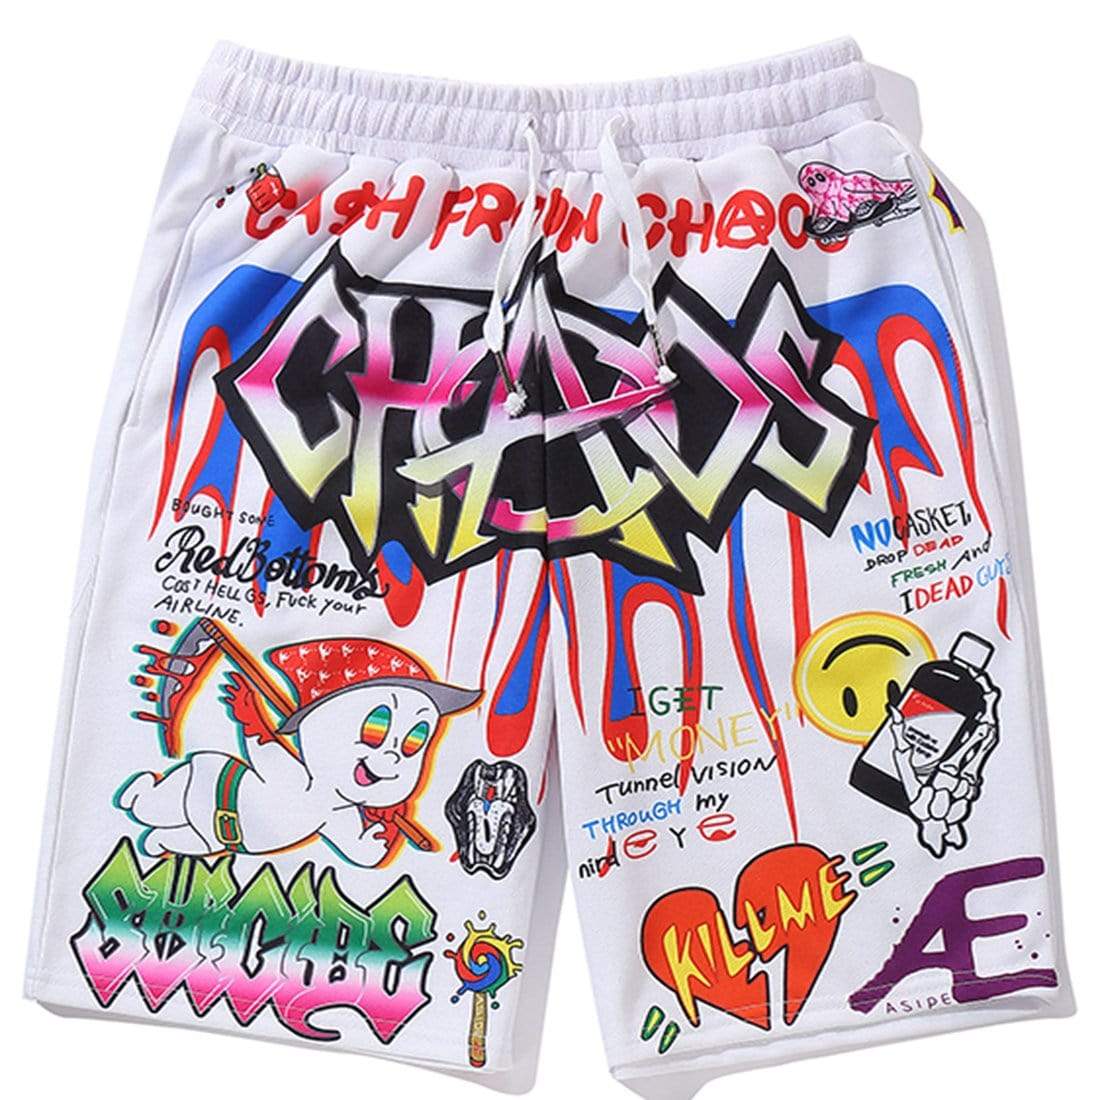 TO Anime Design Printed Shorts